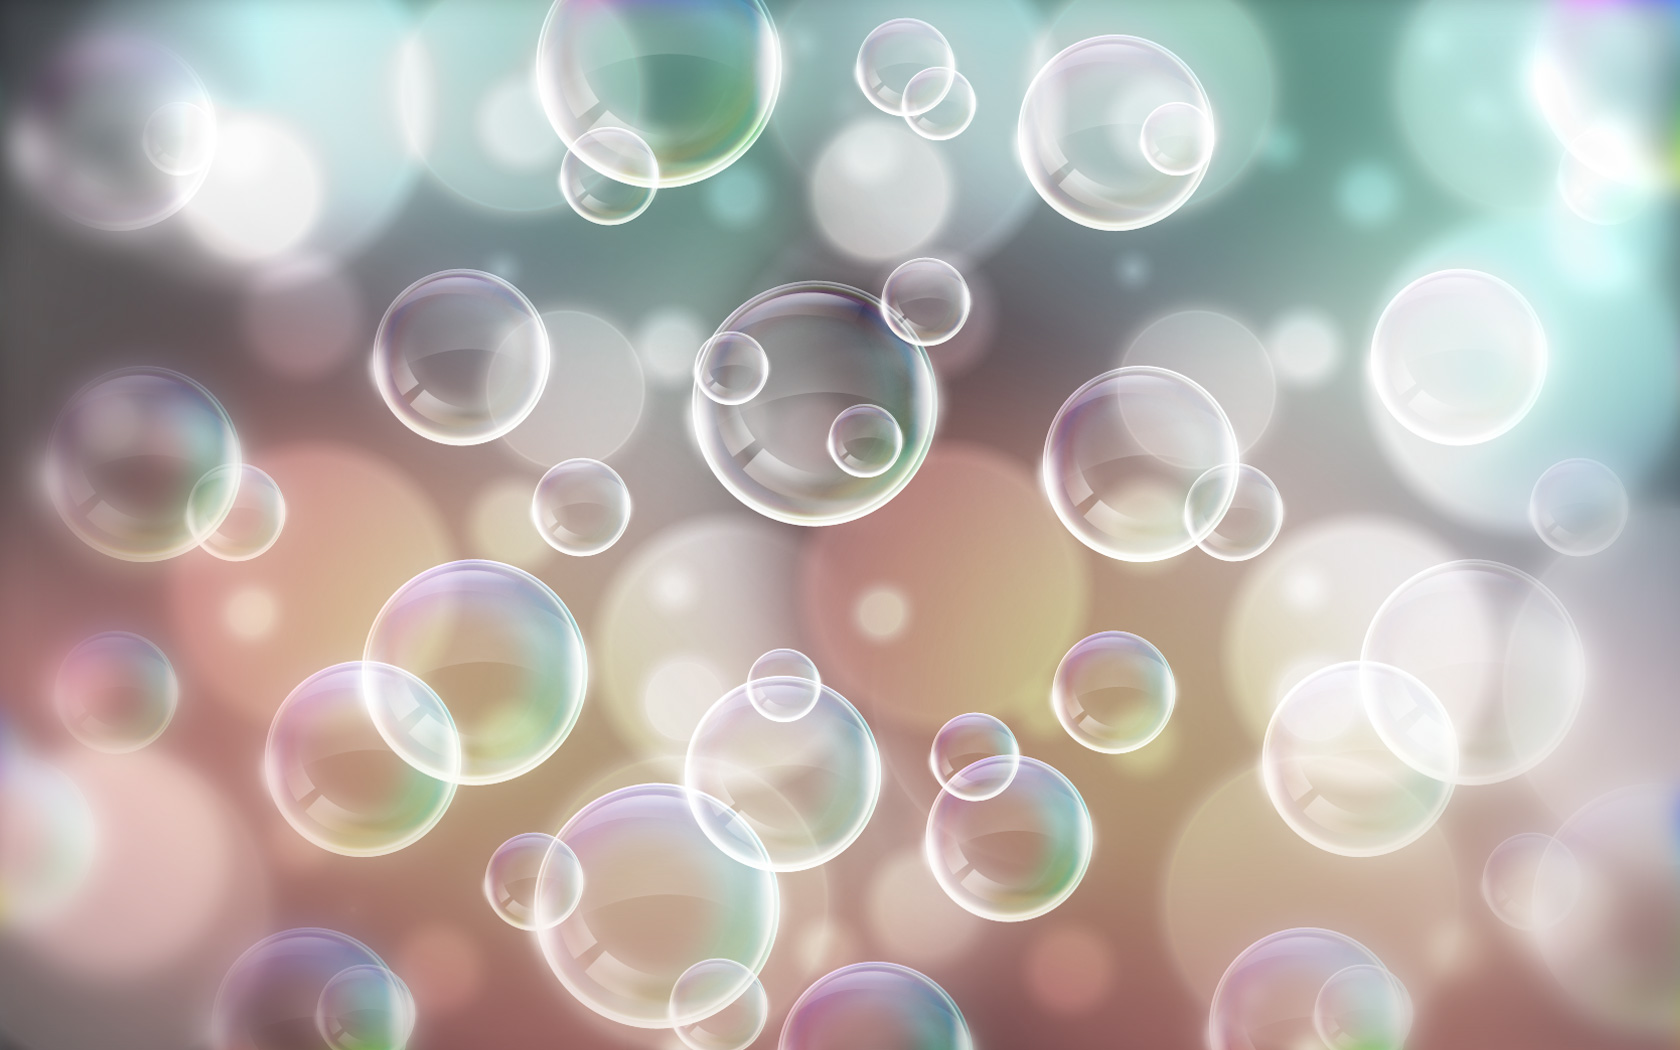 Neon Bubbles Wallpapers  HD Wallpapers  ID 24645